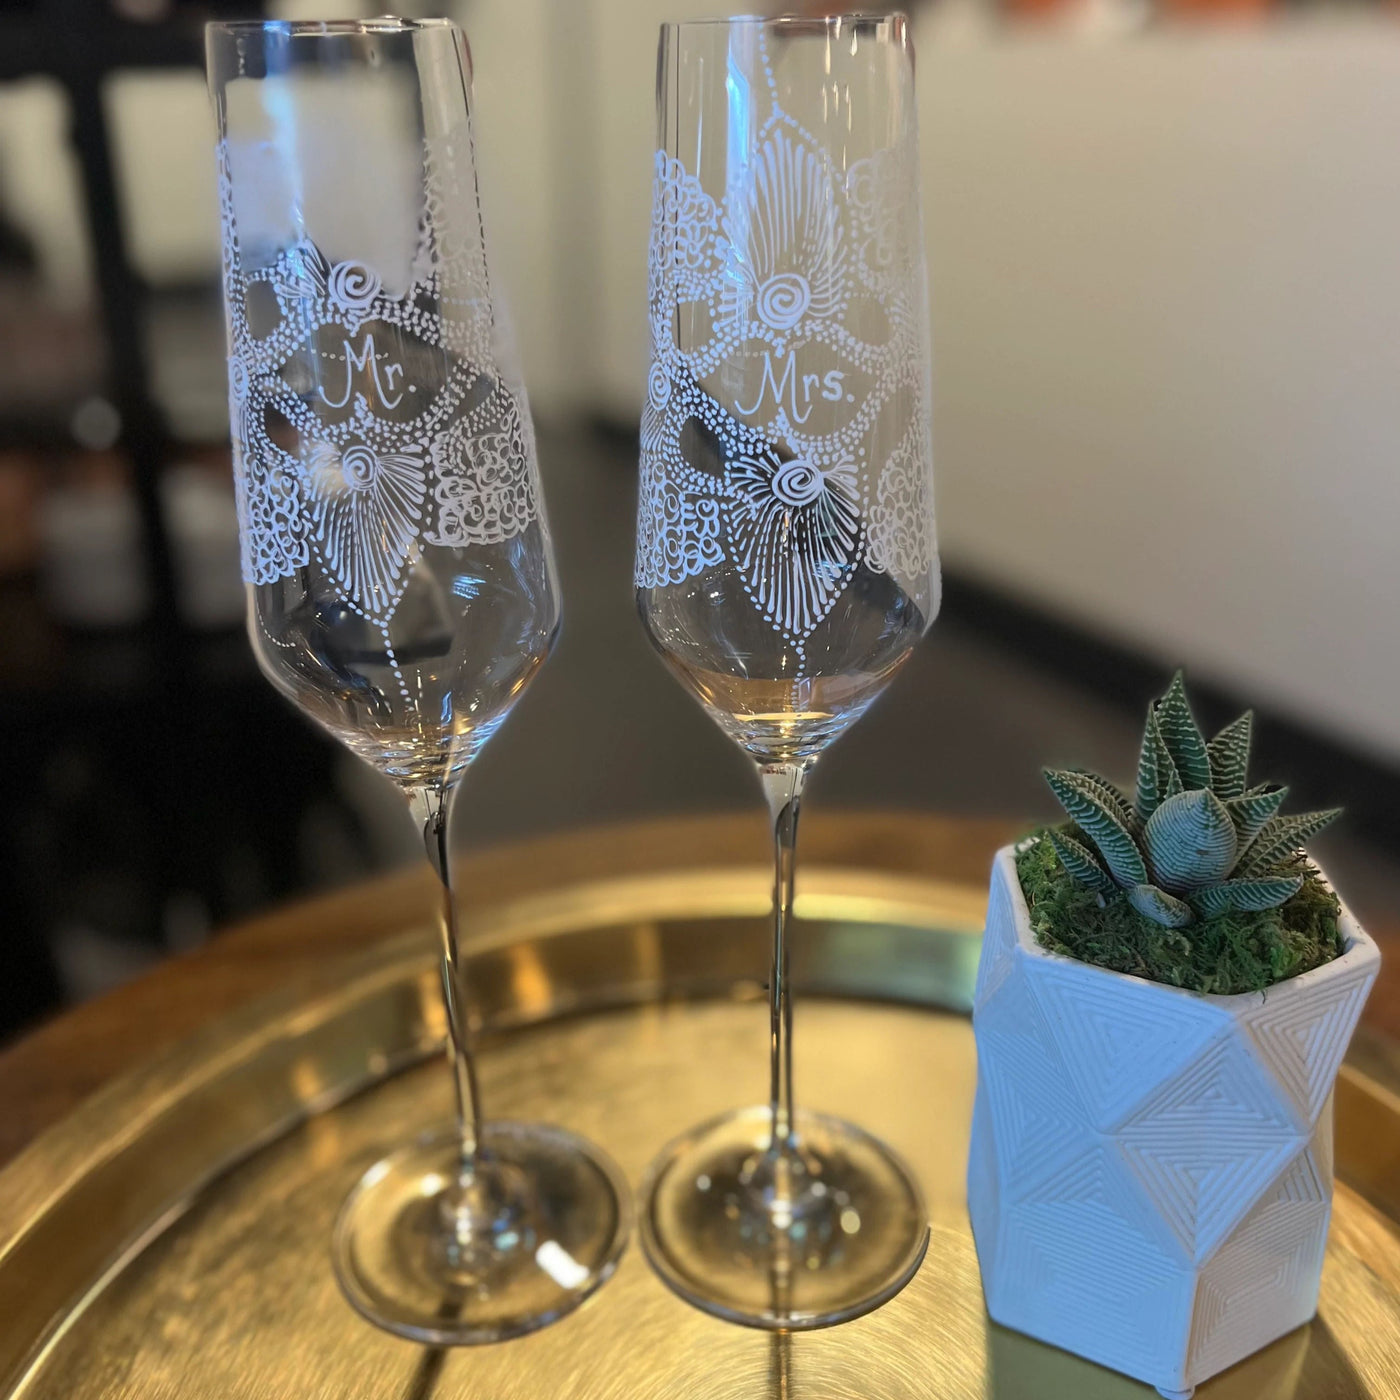 Mr and Mrs Champagne flutes by Neha Assar